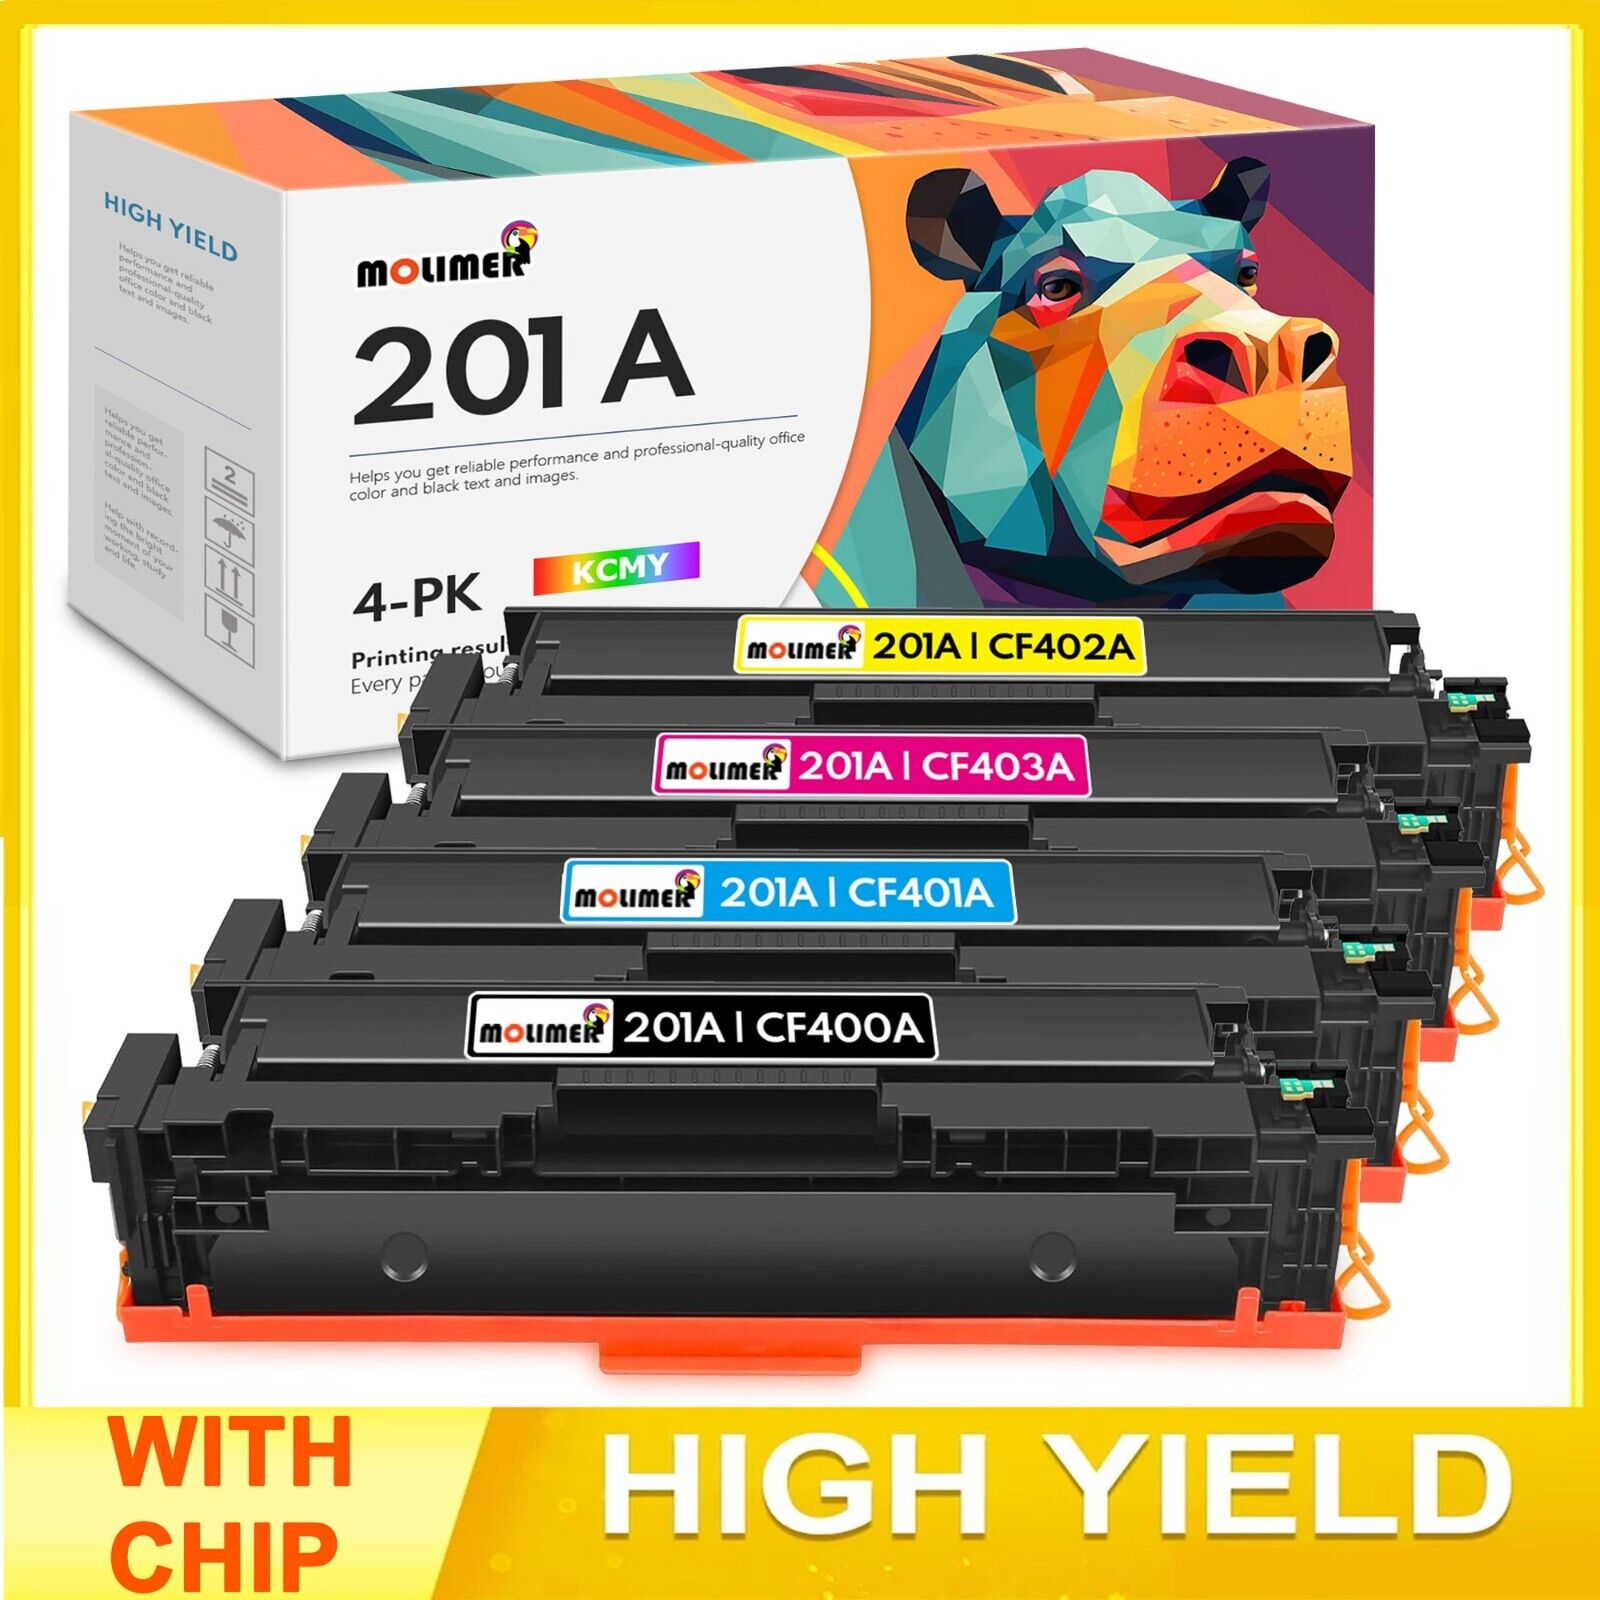 Toner Cartridge 201A Yellow Replacement for HP Black magenta Color M277dw M252dw